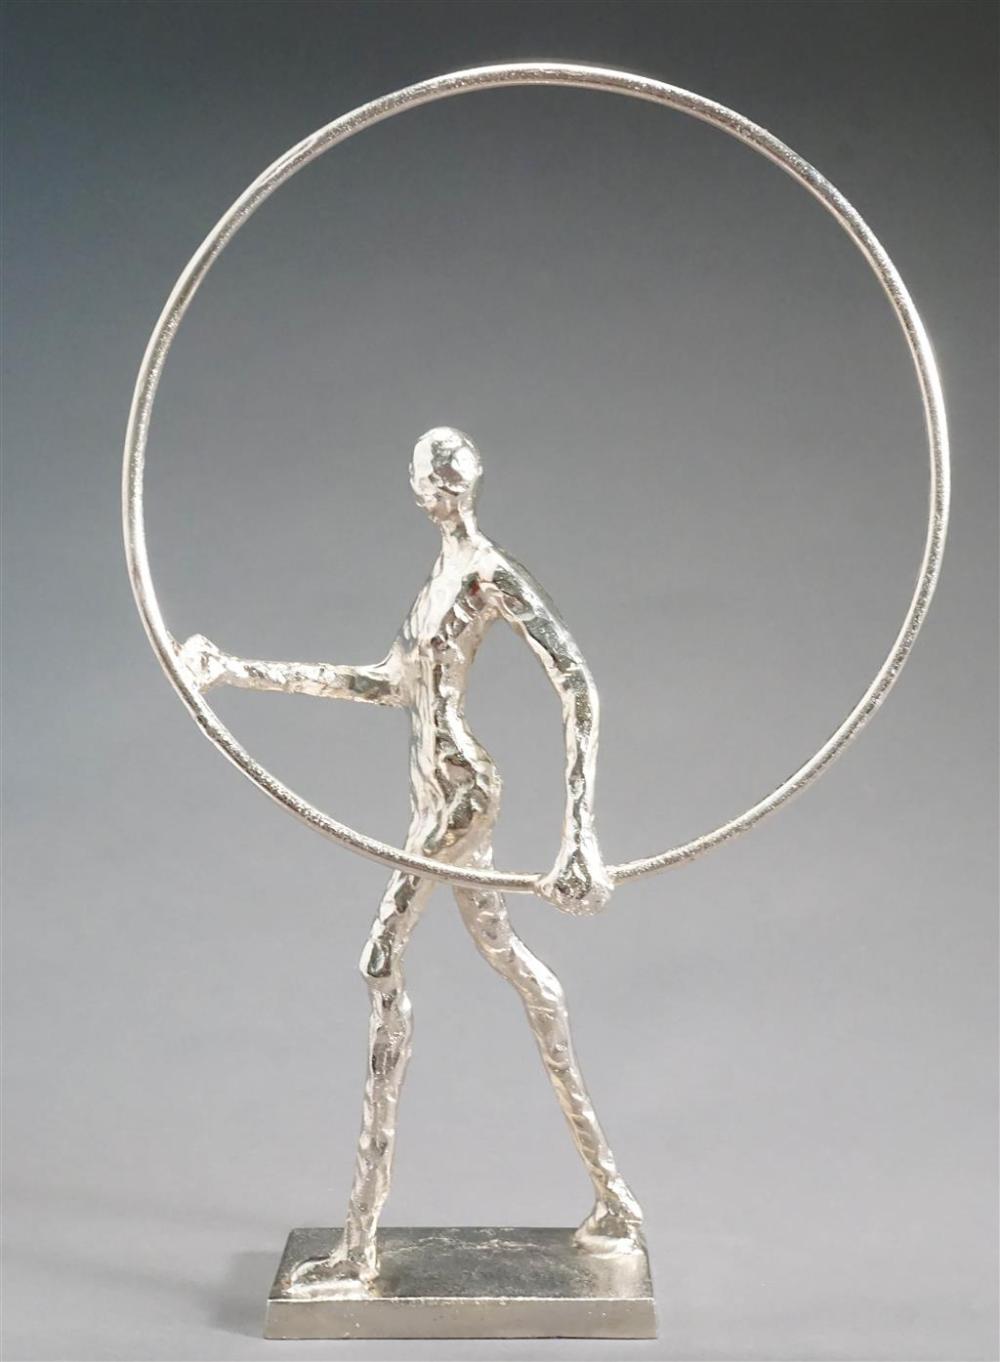 ART DECO STYLE SILVERED METAL FIGURE 32857a